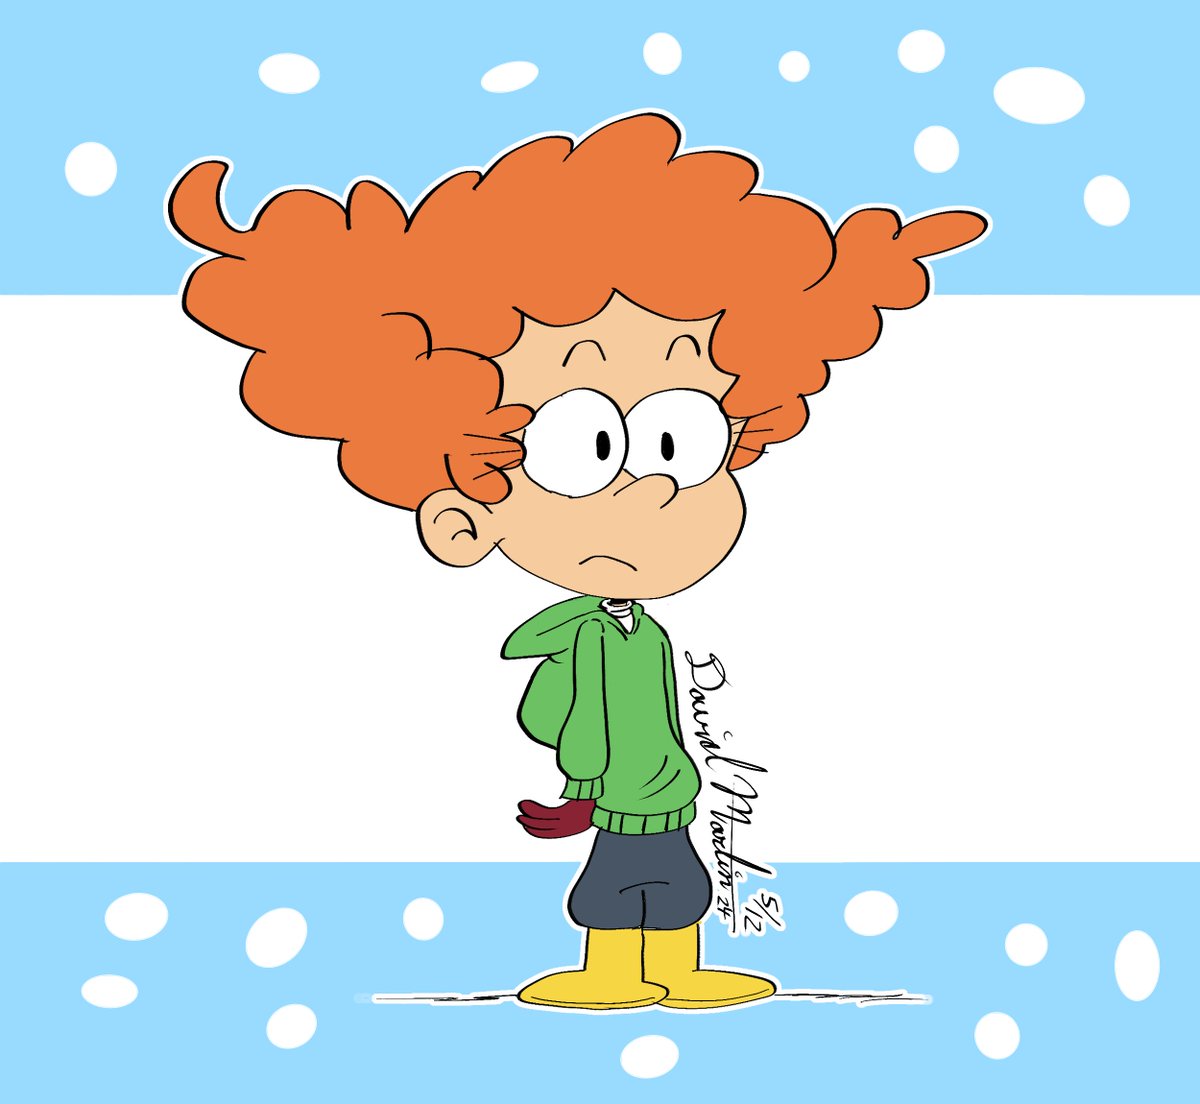 Girl Jordan once again disguised as Rusty. This time in his winter outfit. Commissioned by @marini_connor #TheLoudHouse #commission